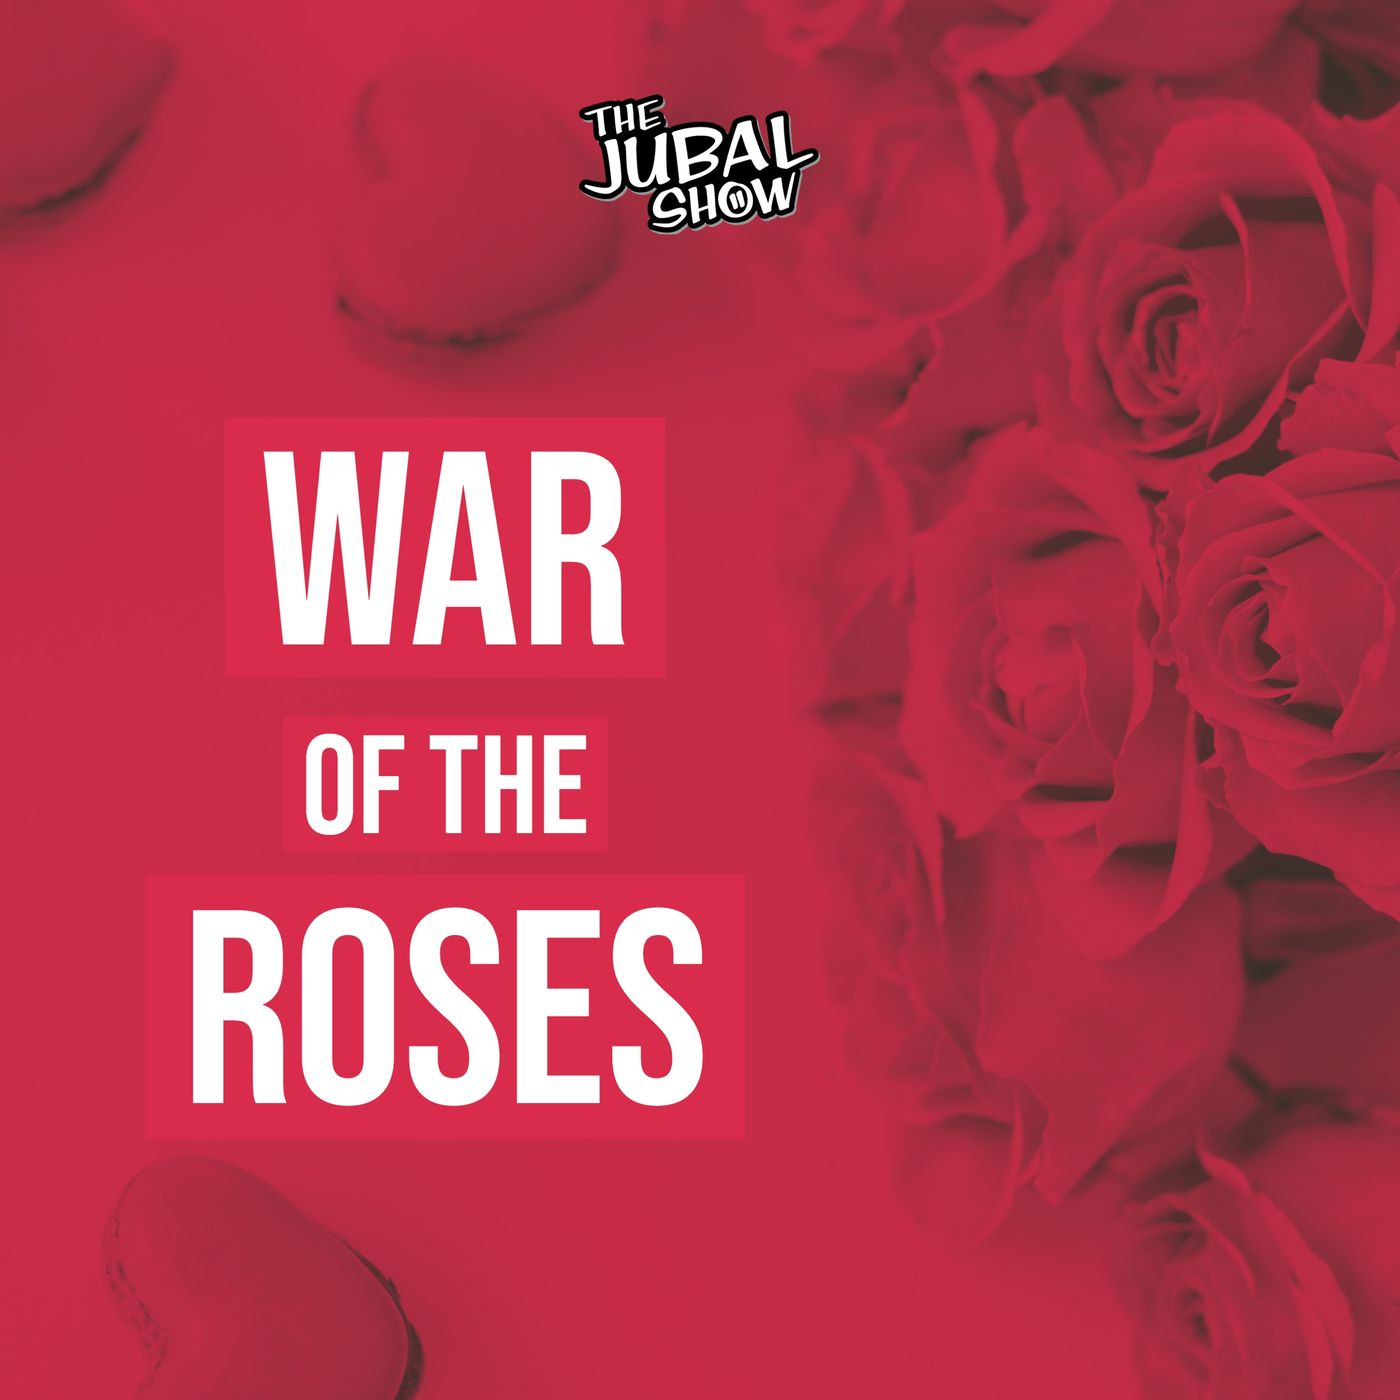 Is there a COUGAR involved in this War Of The Roses!?